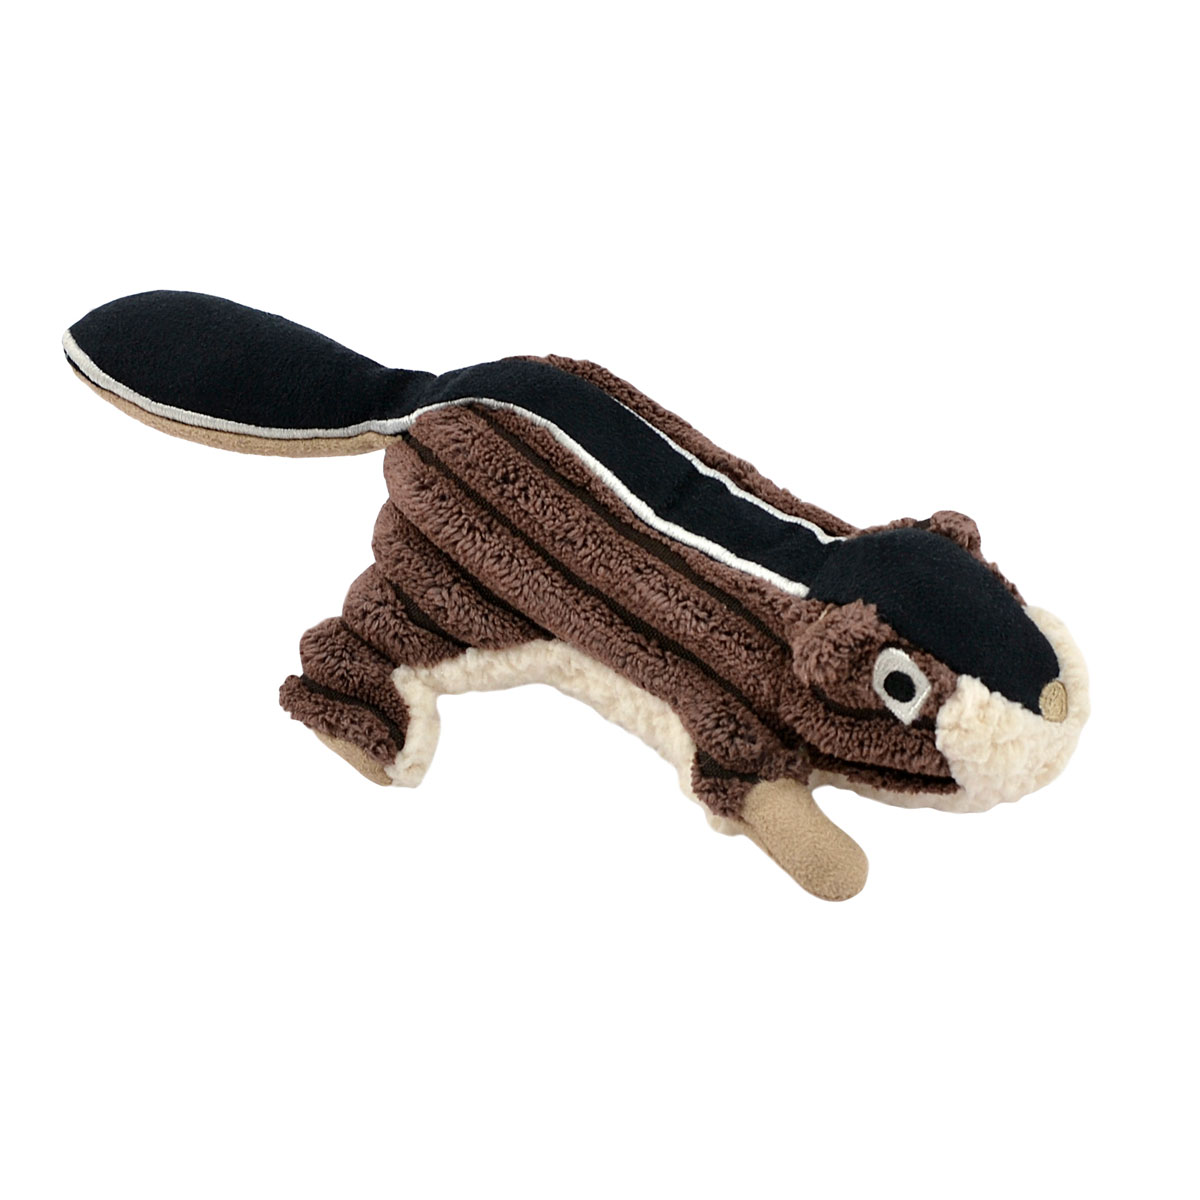 Tall Tails Plush Chipmunk with Squeaker Toy - Hala's Paws